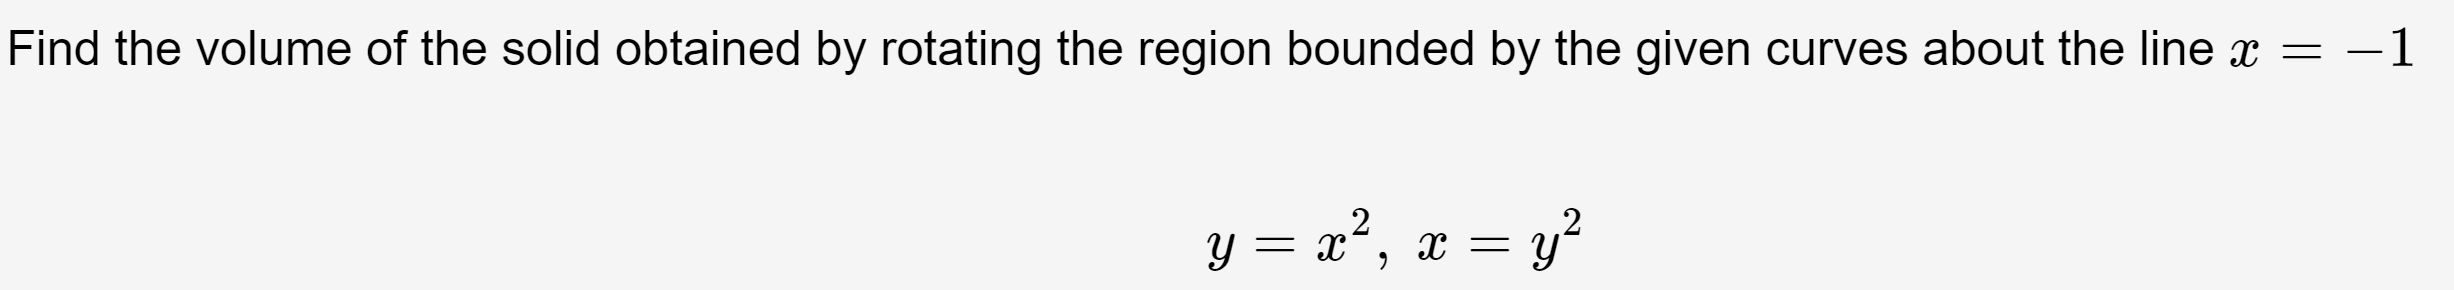 Find the volume of the solid obtained by rotating the region bounded by the given curves about the line x = -1
y = x², x = y²
